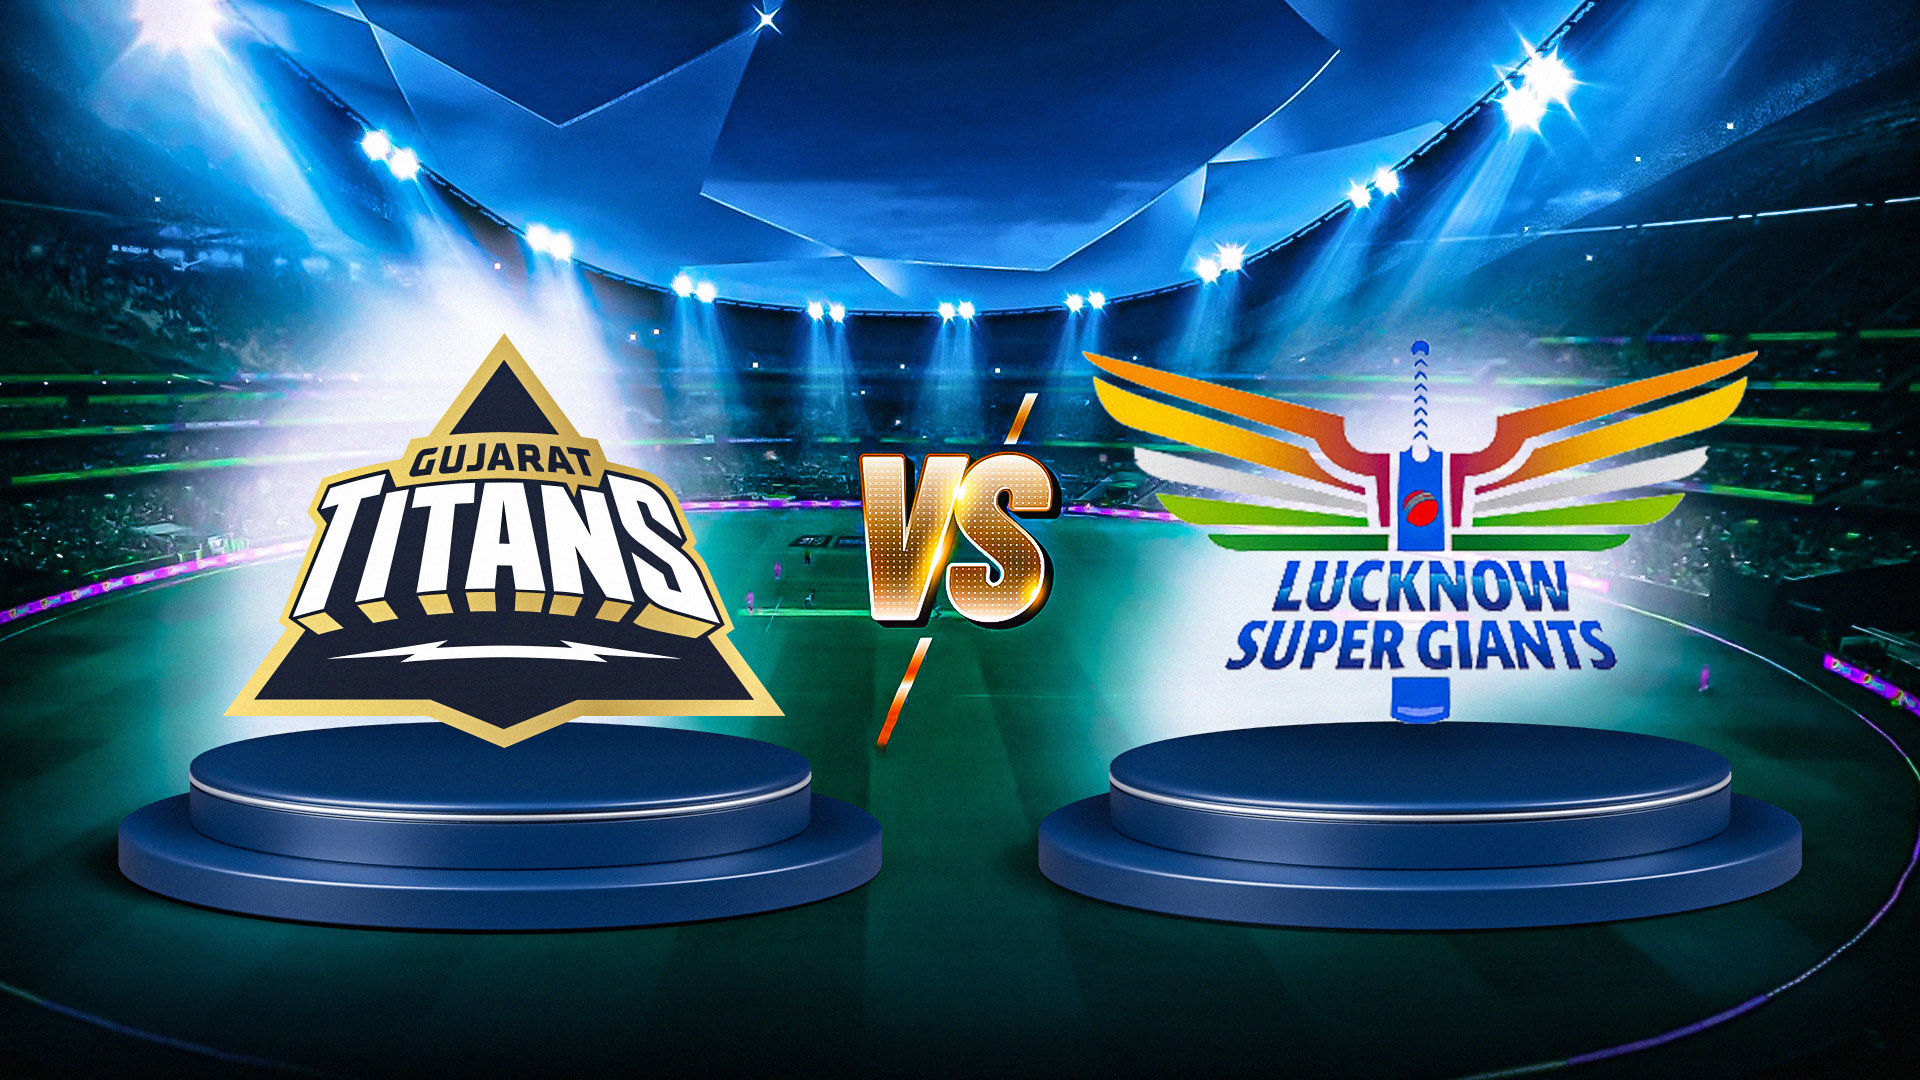 Cricket Betting Tips And Match Prediction For Gujarat Titans vs Lucknow Super Giants 51st Match Tips With Online Betting Tips Cbtf Cricket-Free Cricket Tips-Match Tips-Jsk Tips